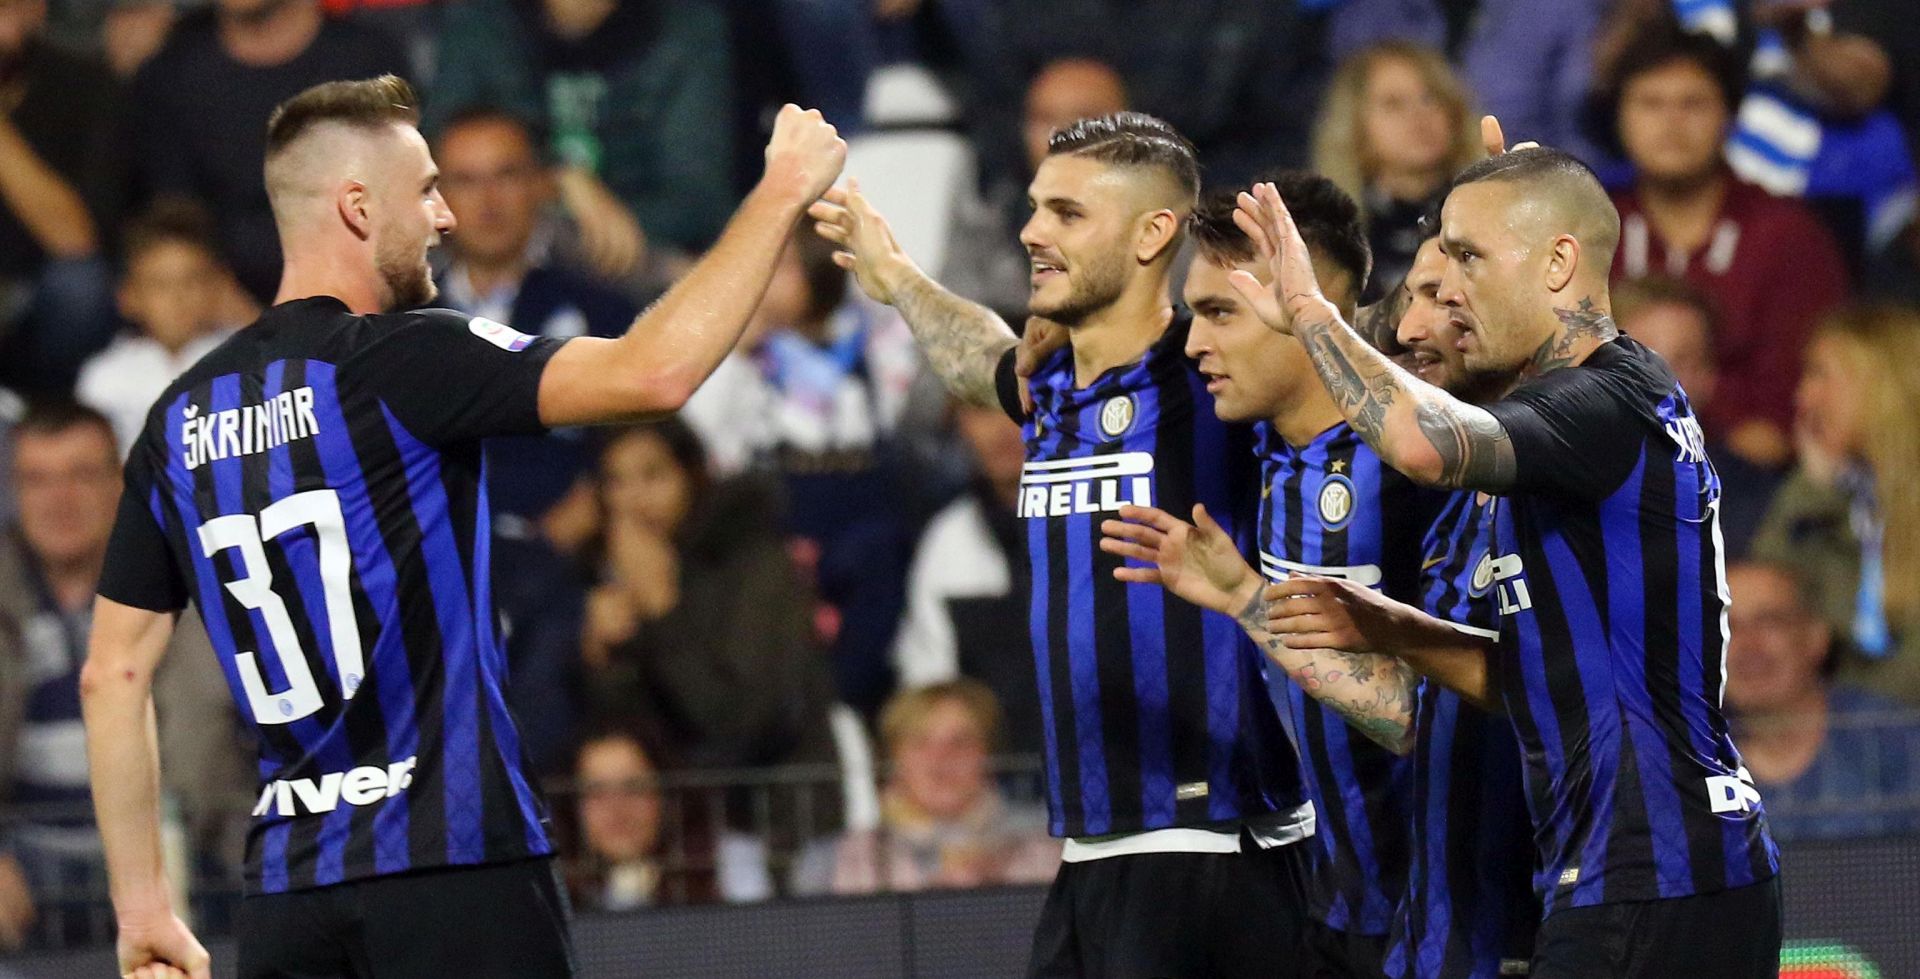 epa07077710 Inter's Mauro Icardi  jubilates with his teammates after scoring his second the goal during the Italian Serie A soccer match Spal 2013 vs FC Inter at Paolo Mazza Stadium in Ferrara, Italy, 7 October 2018.  EPA/Elisabetta Baracchi